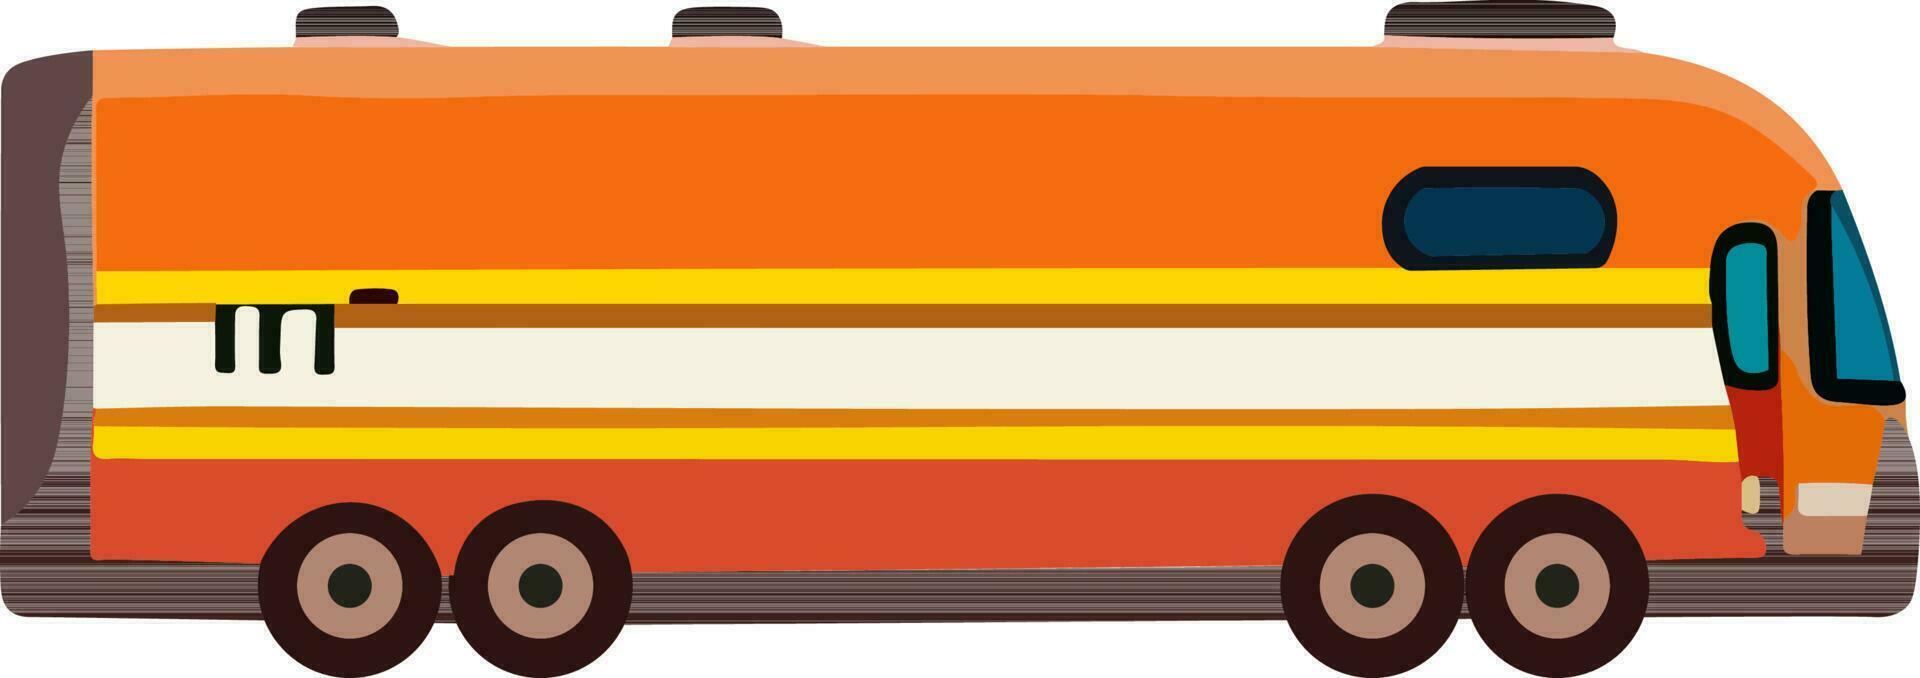 Isolated Orange Bus Icon In Flat Style. vector